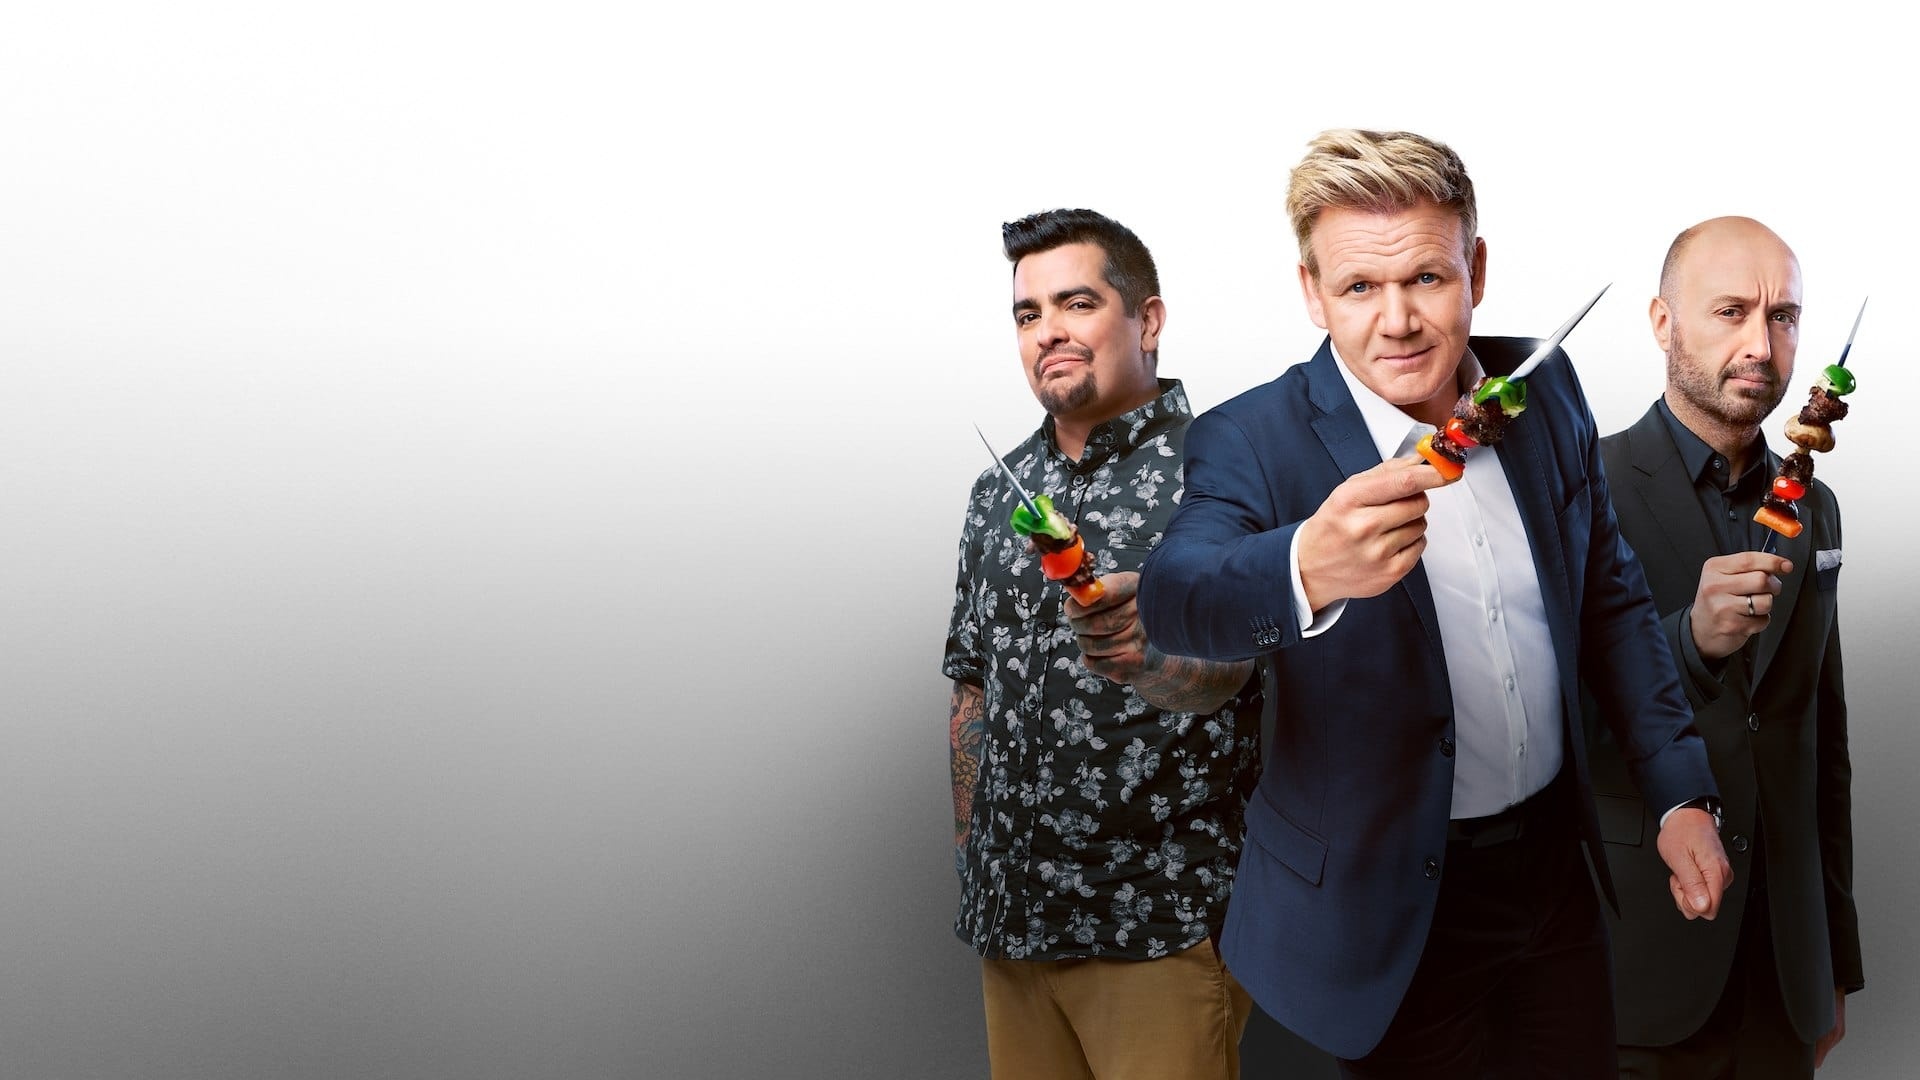 Masterchef, TV series, High-stakes cooking, Gourmet dishes, 1920x1080 Full HD Desktop